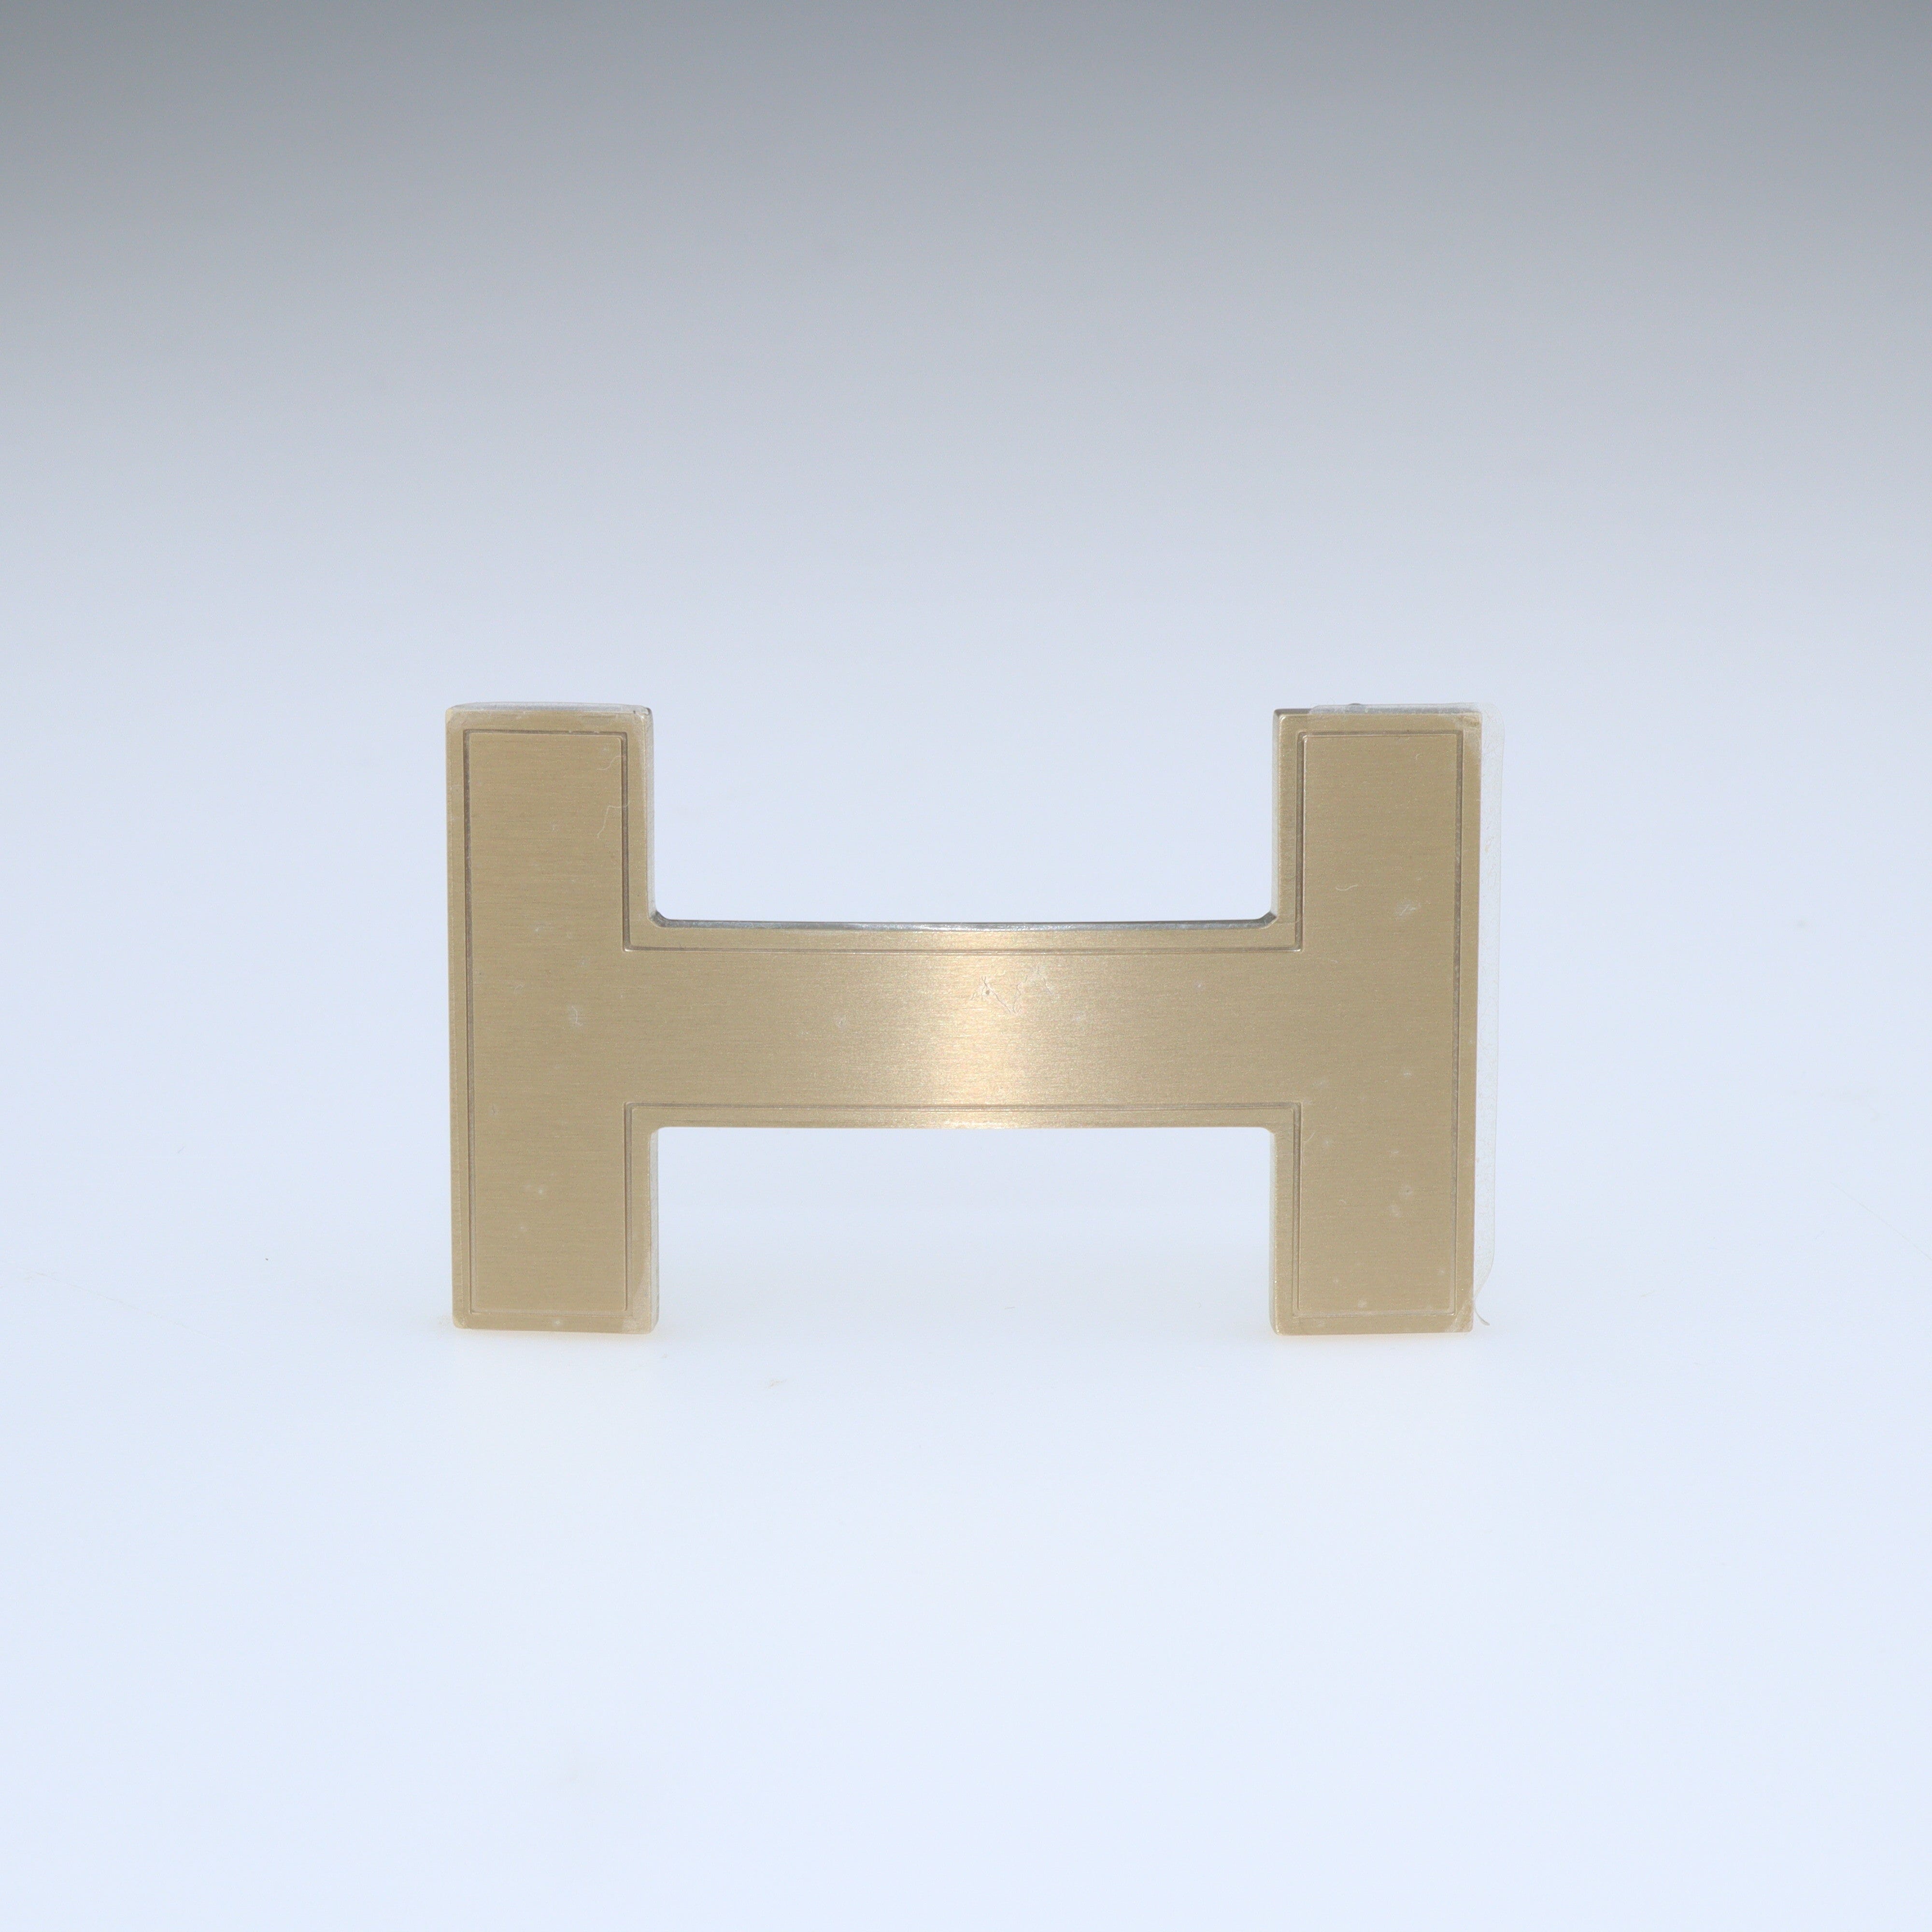 Gold Shiny H Constance Buckle Accessories Hermes 